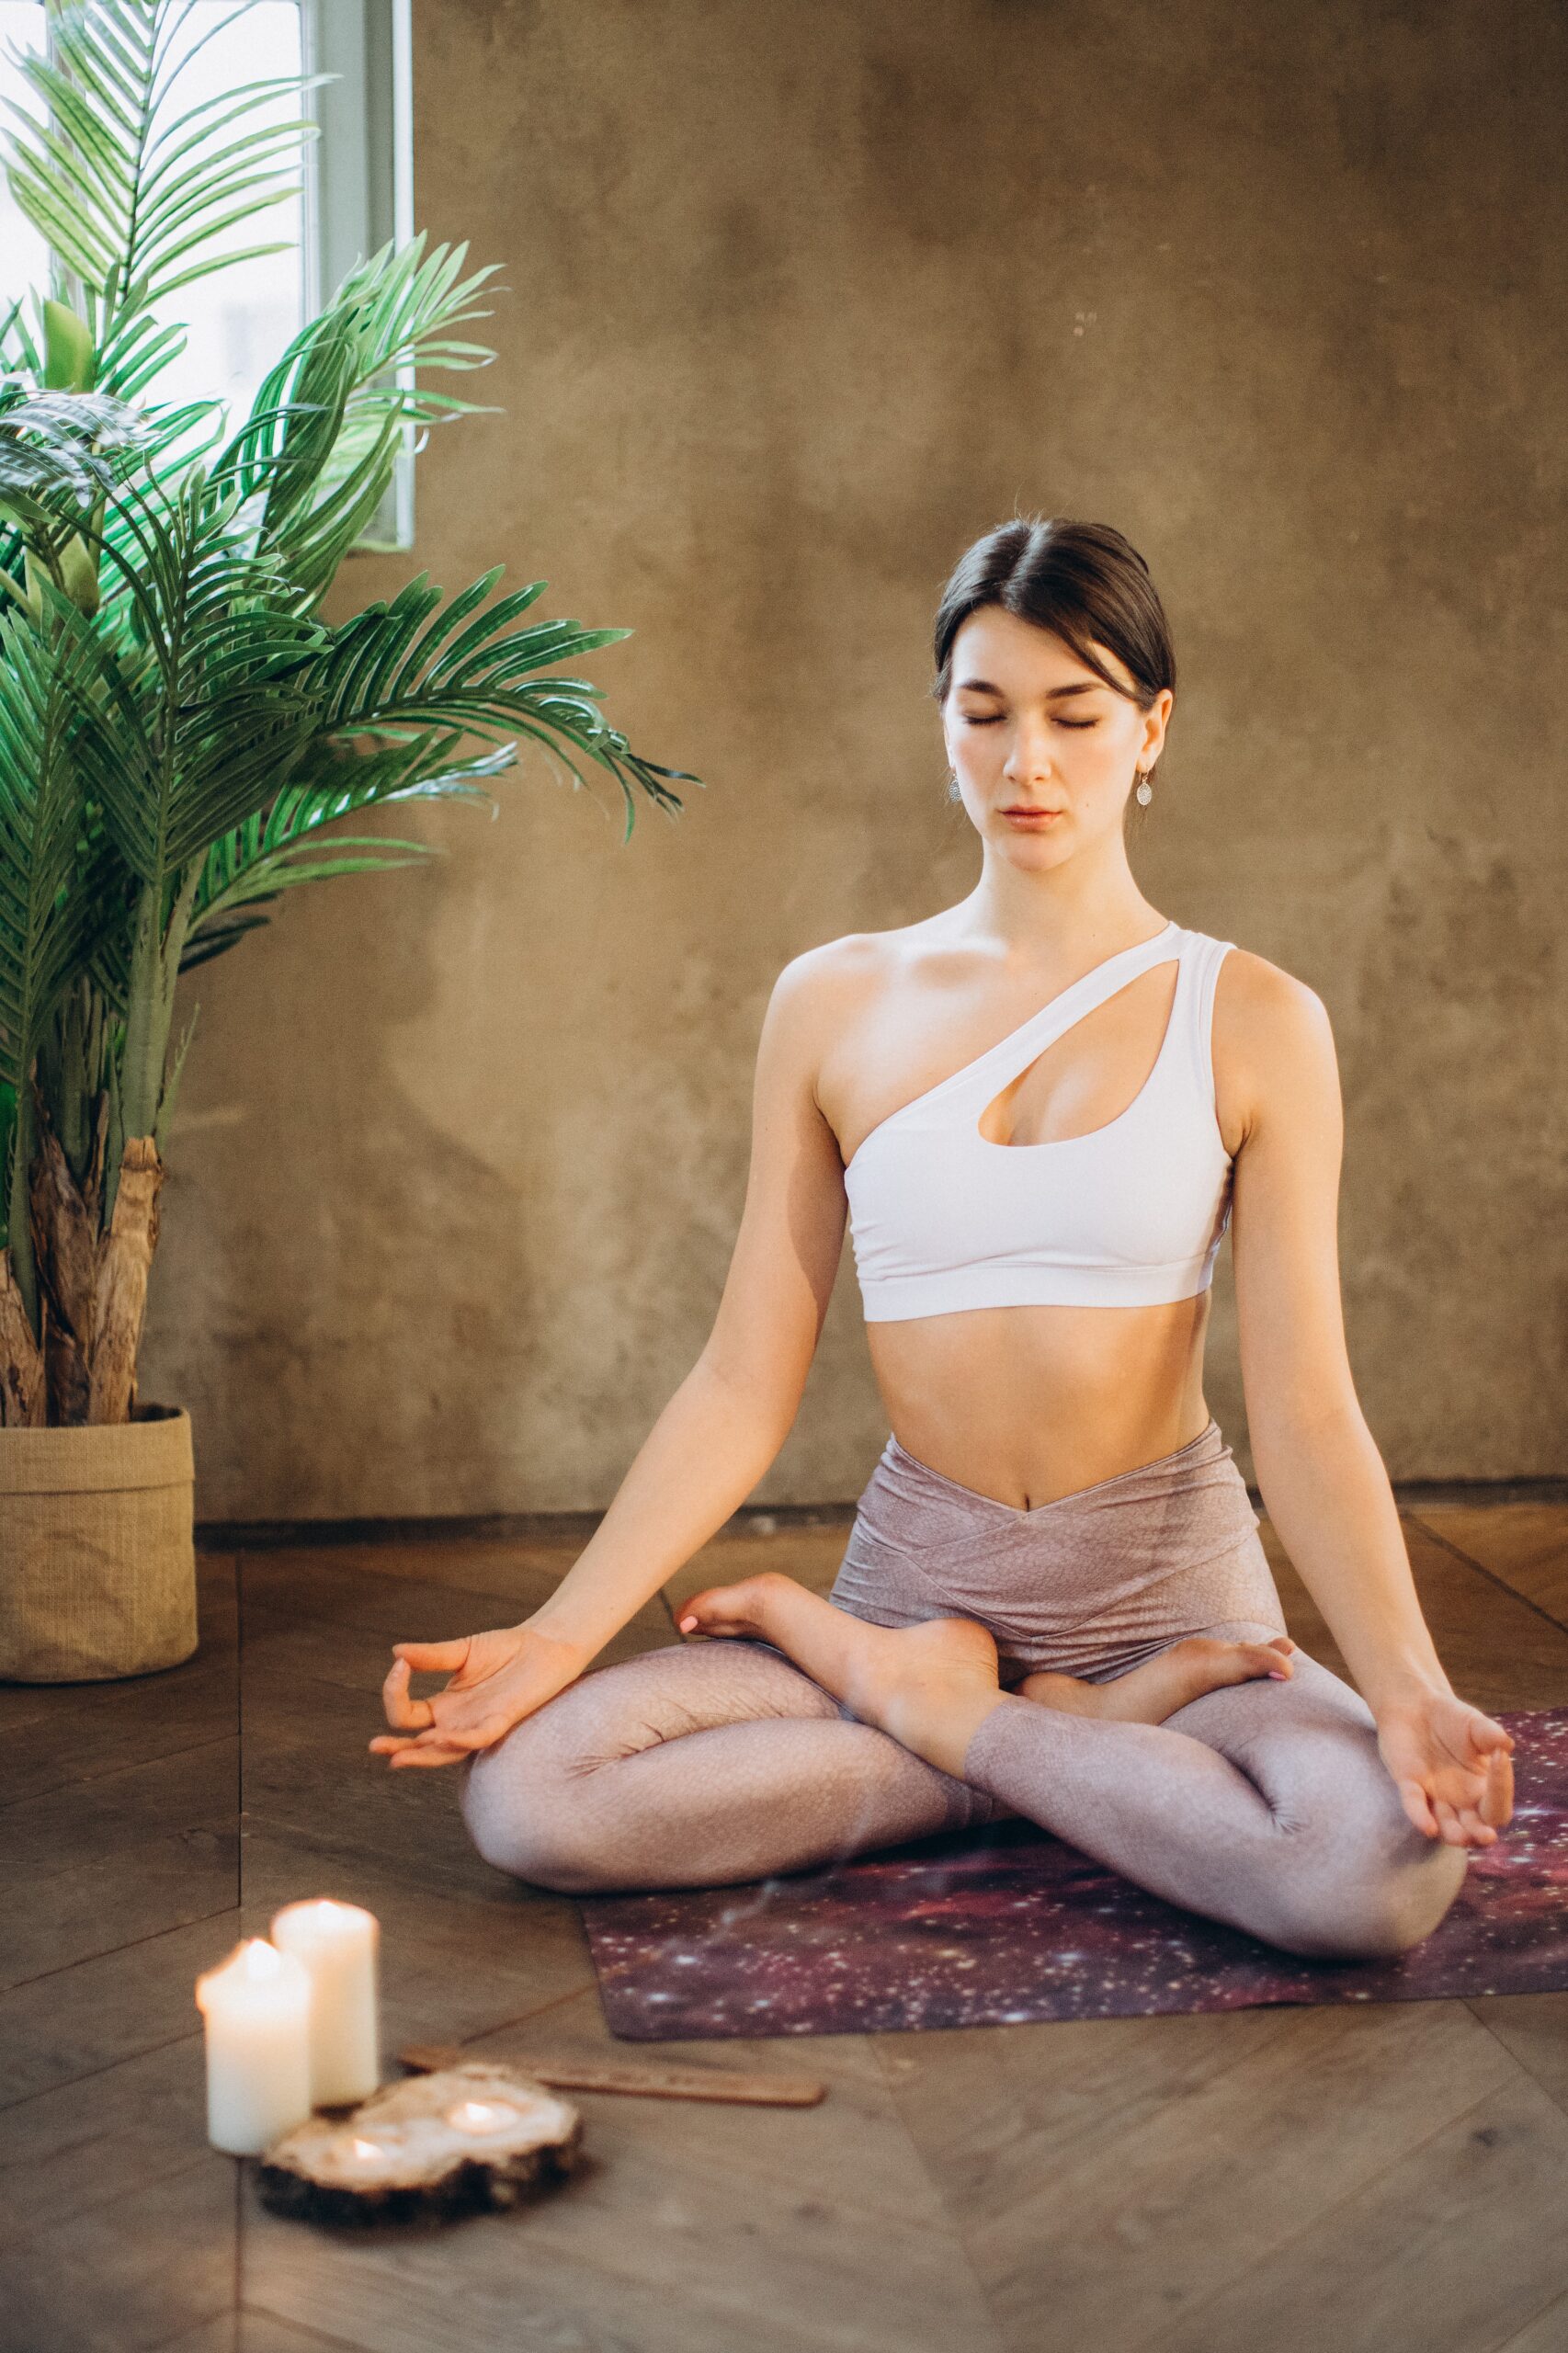 What is a Lotus Pose (Padmasana) and their Health Benefits?